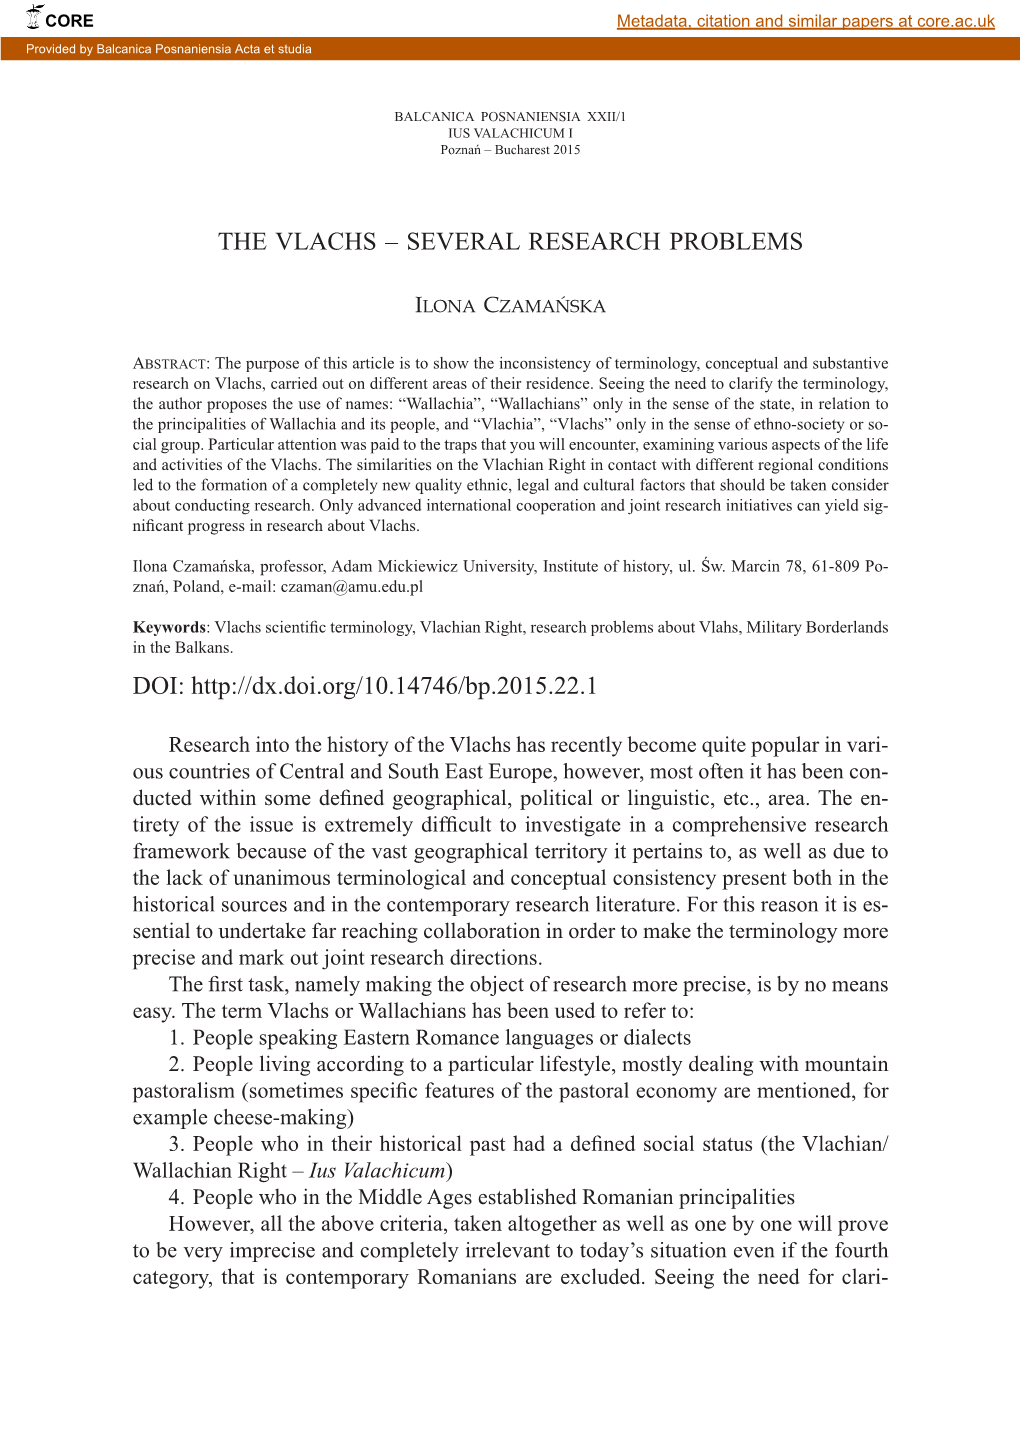 THE VLACHS – SEVERAL RESEARCH PROBLEMS DOI: Http